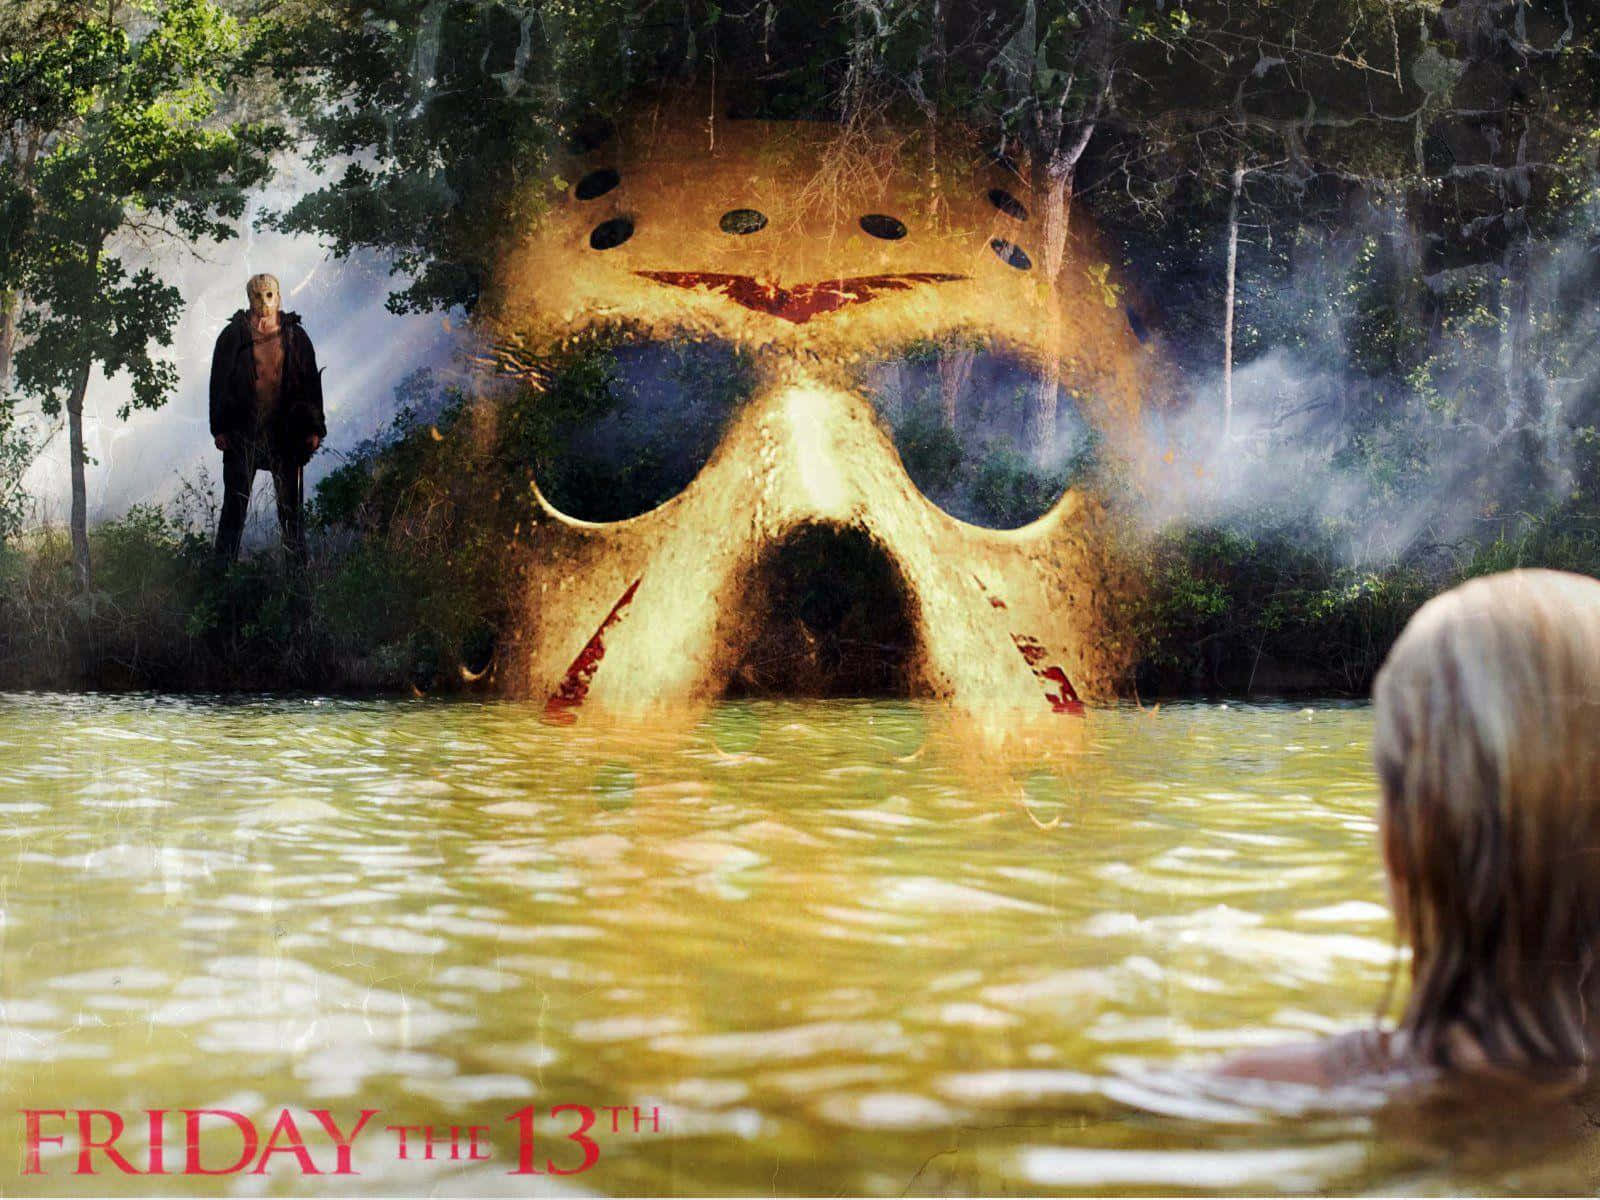 The icon of horror, Jason Voorhees